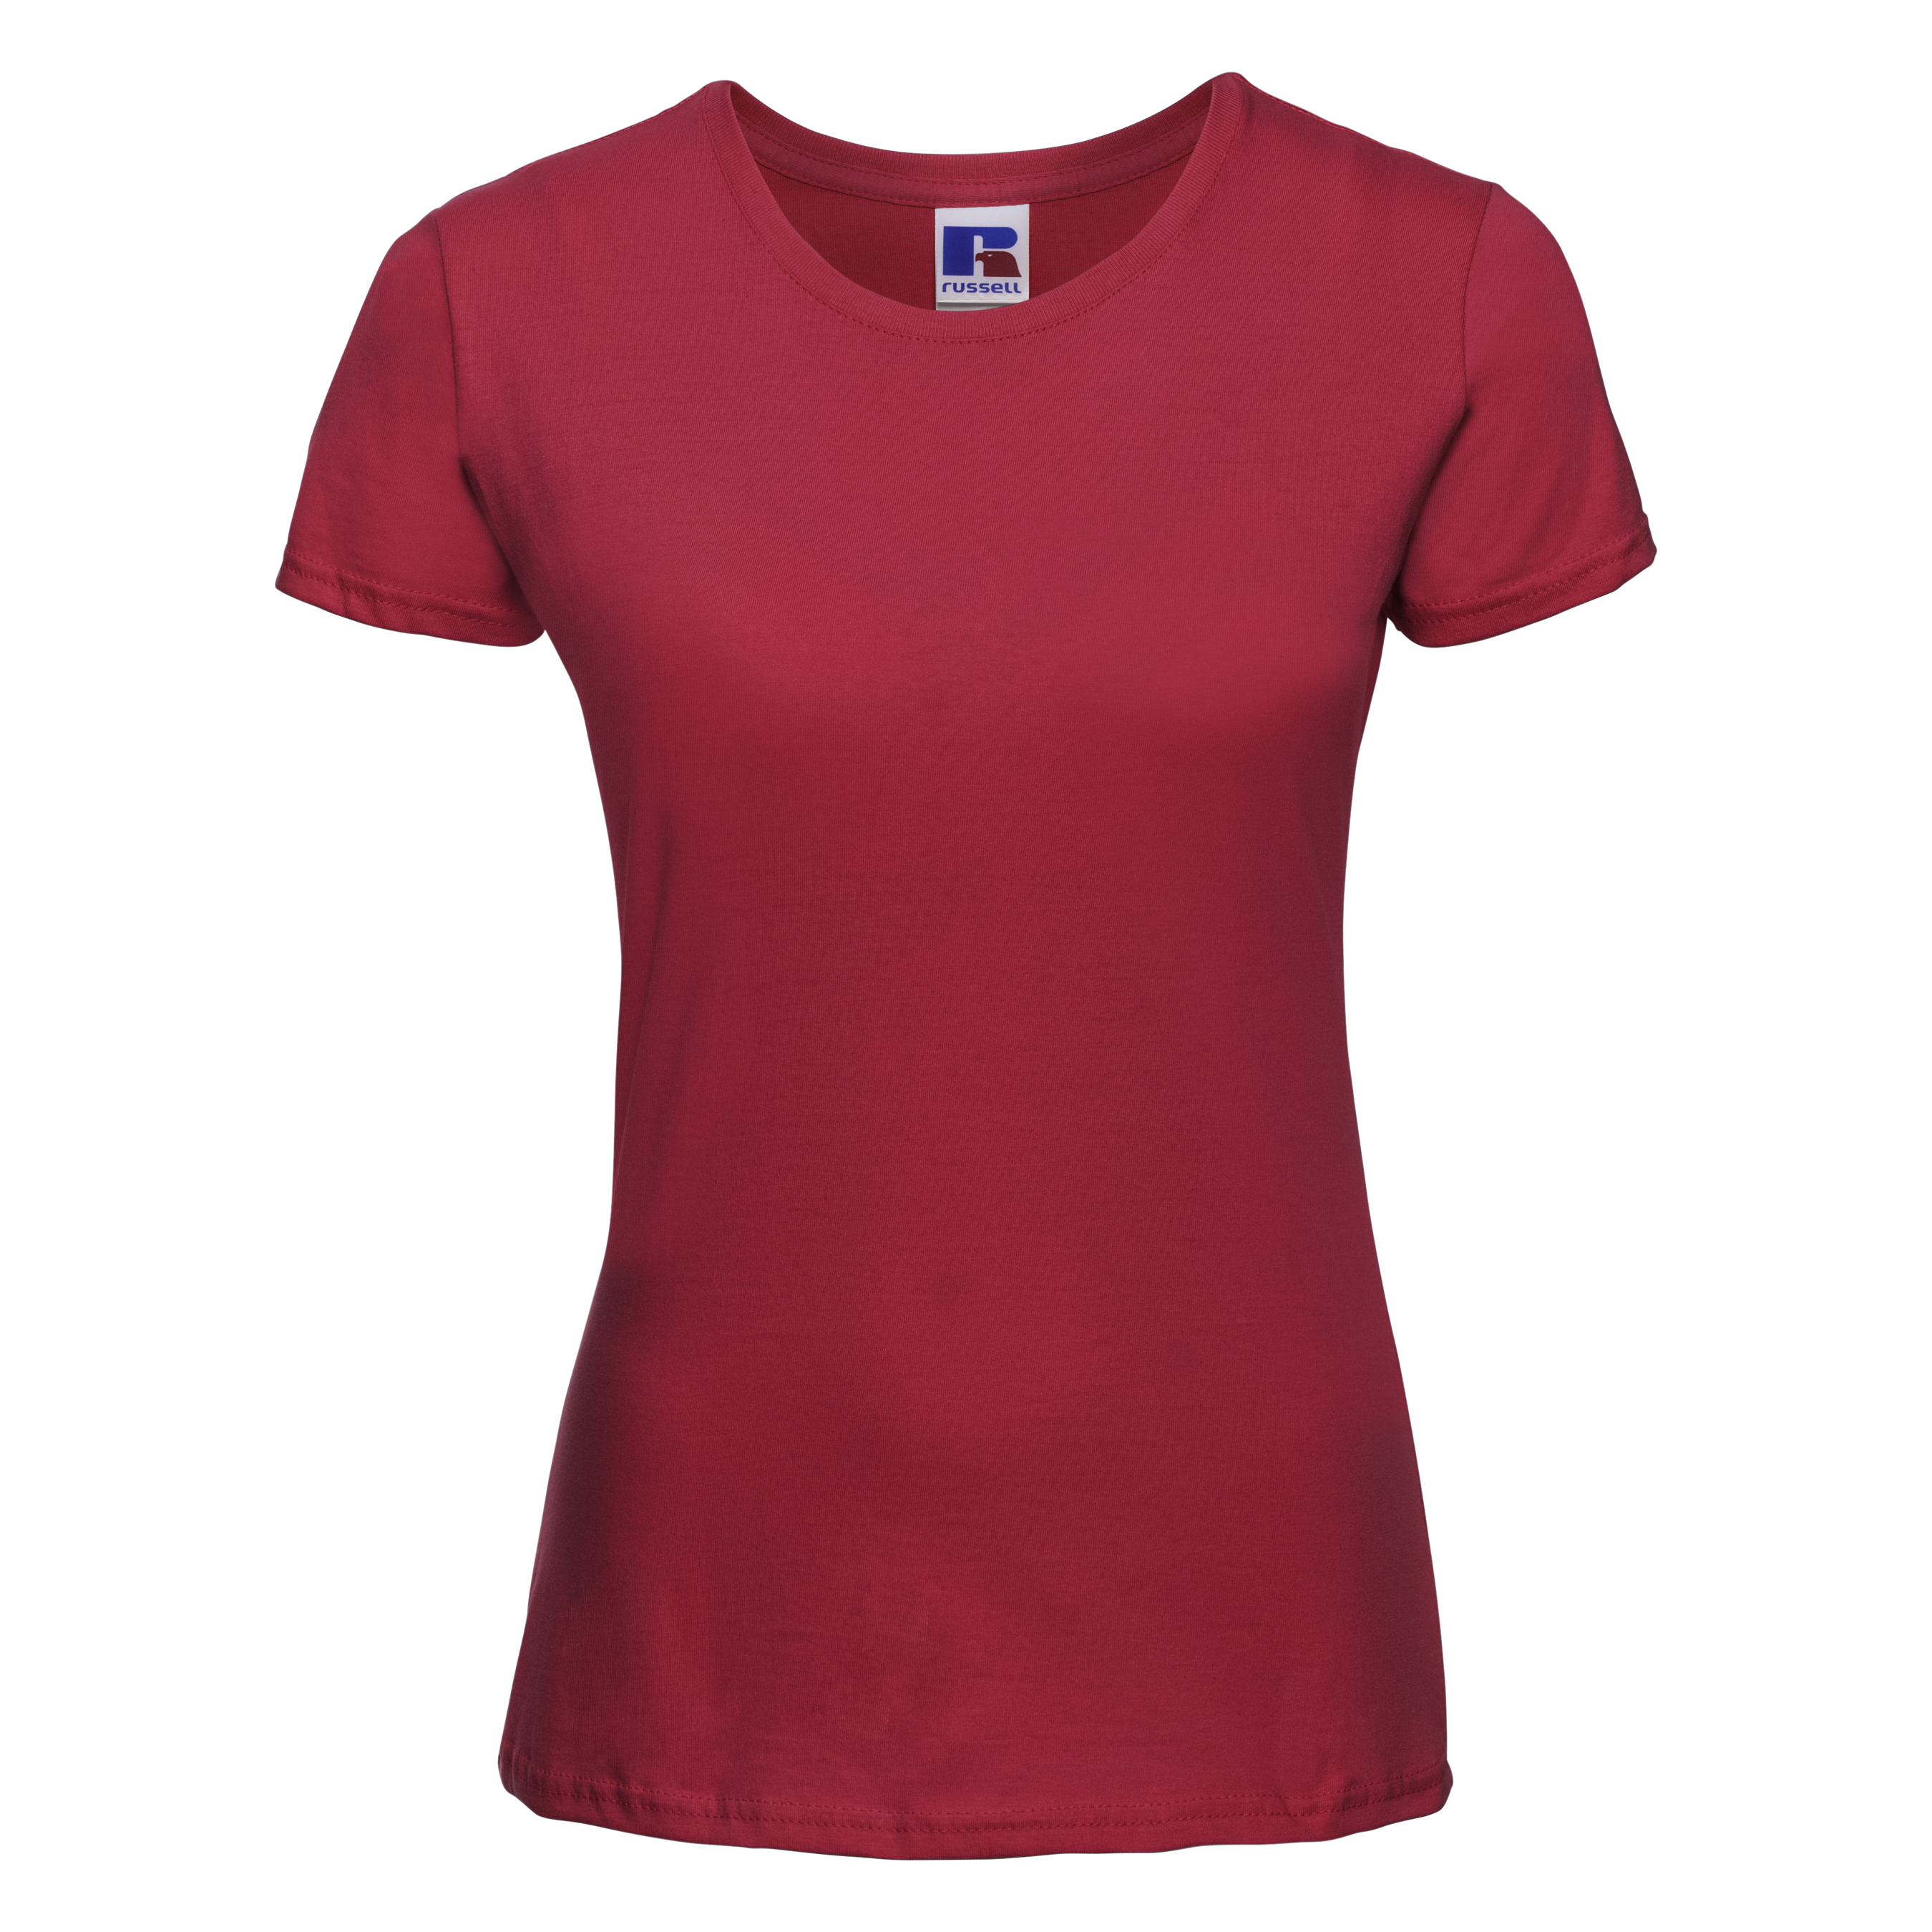 ax-httpswebsystems.s3.amazonaws.comtmp_for_downloadwomens-slim-t-classic-red.jpg